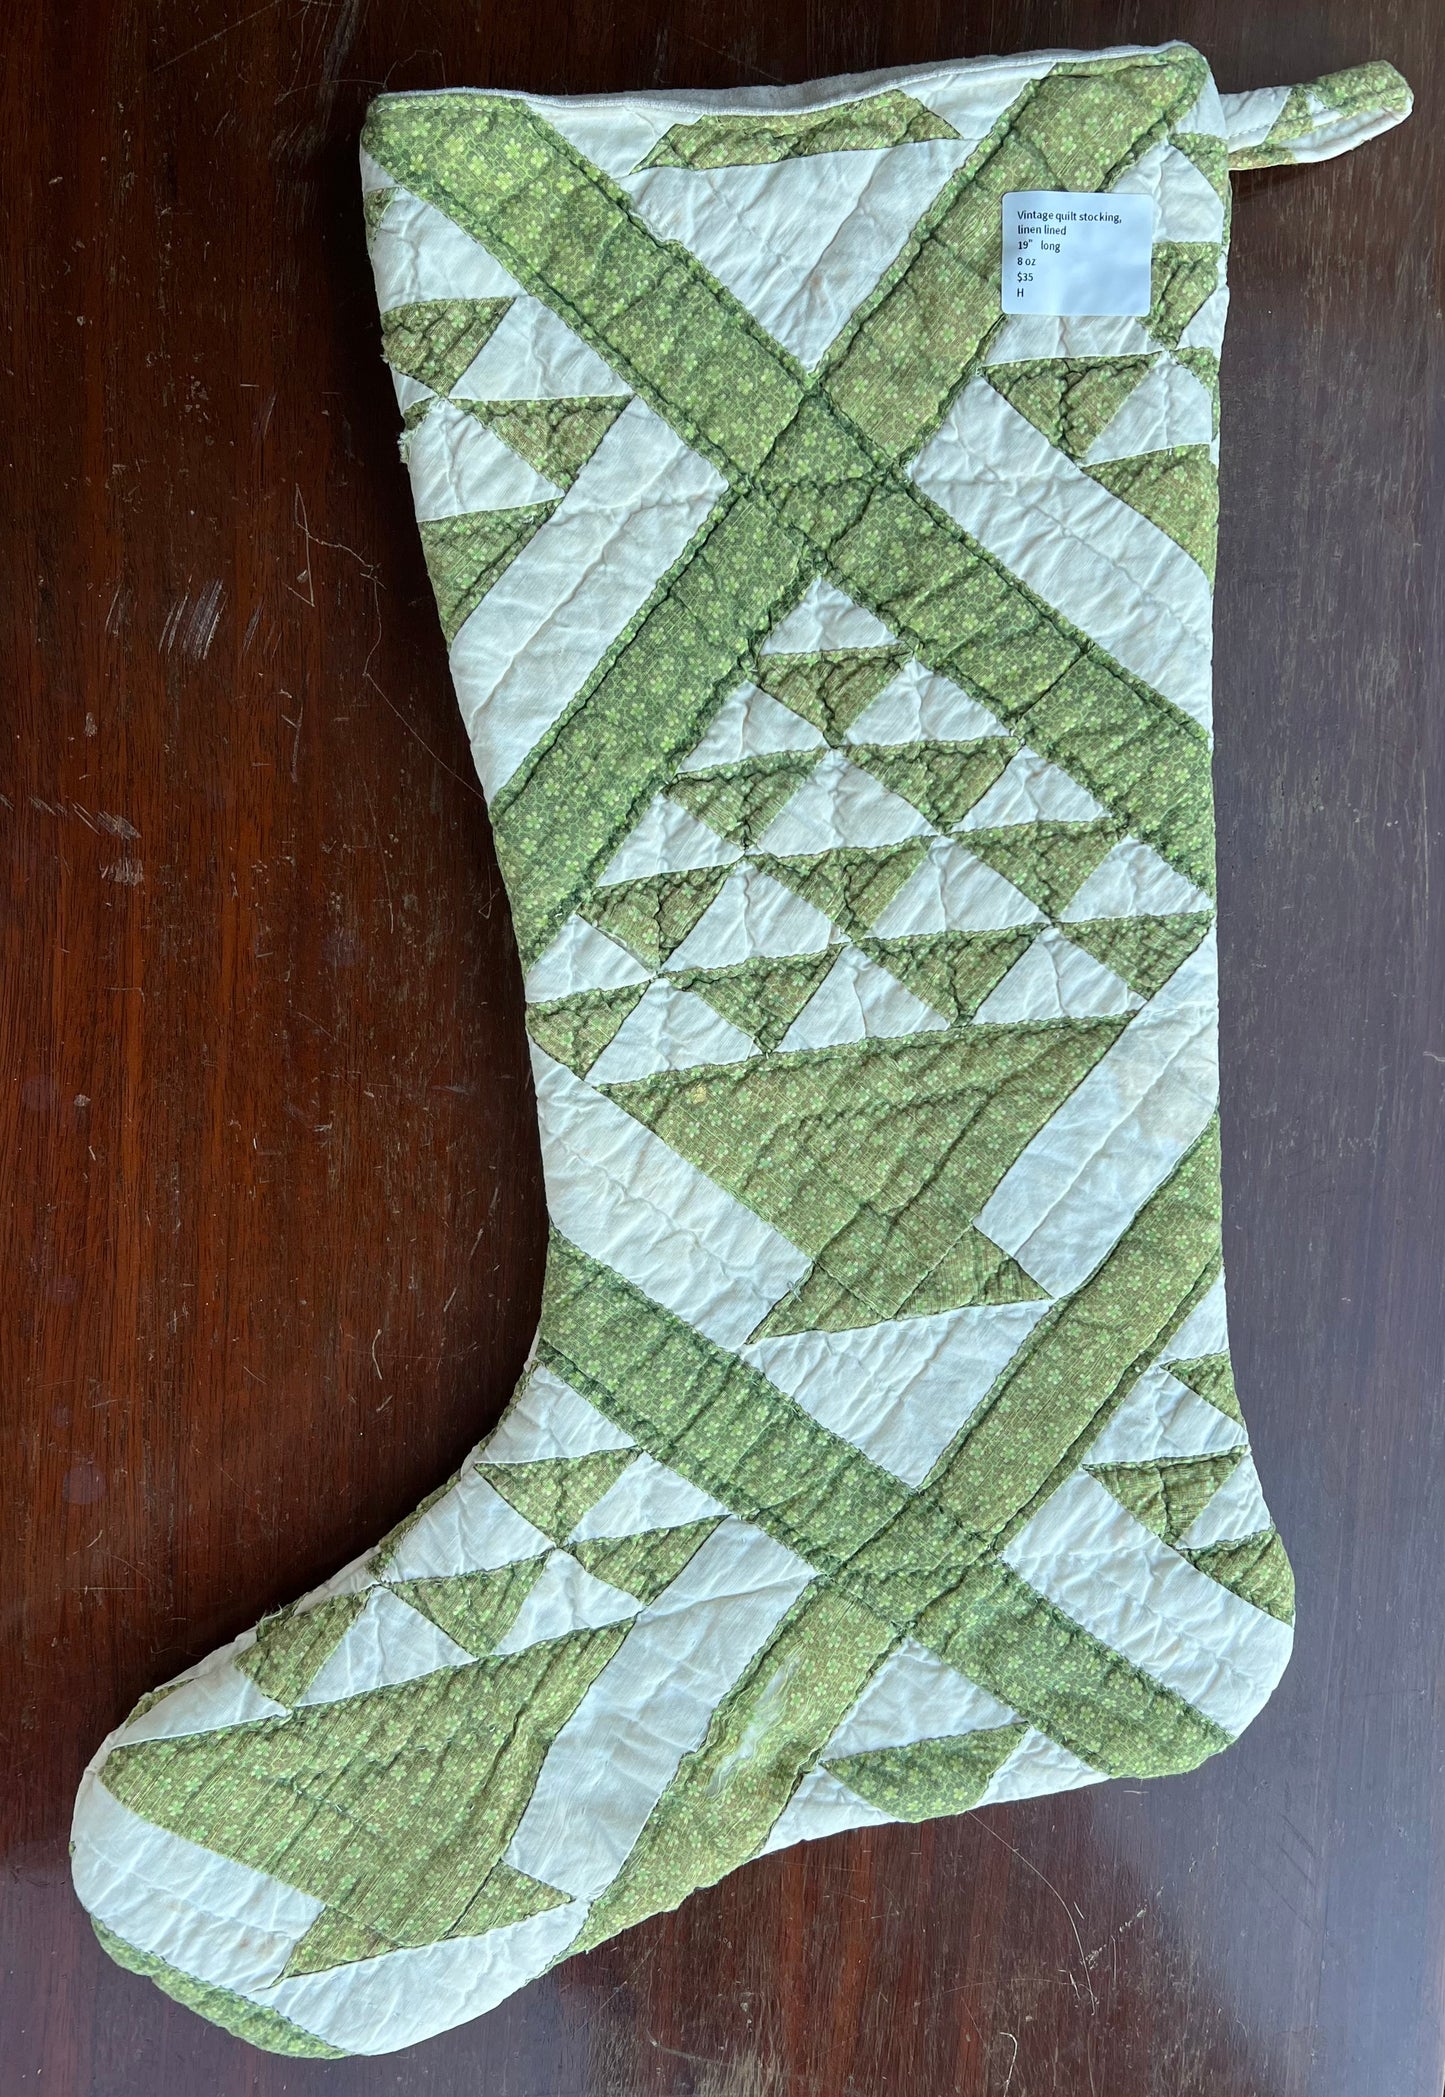 Vintage Quilt Stocking, in red and green